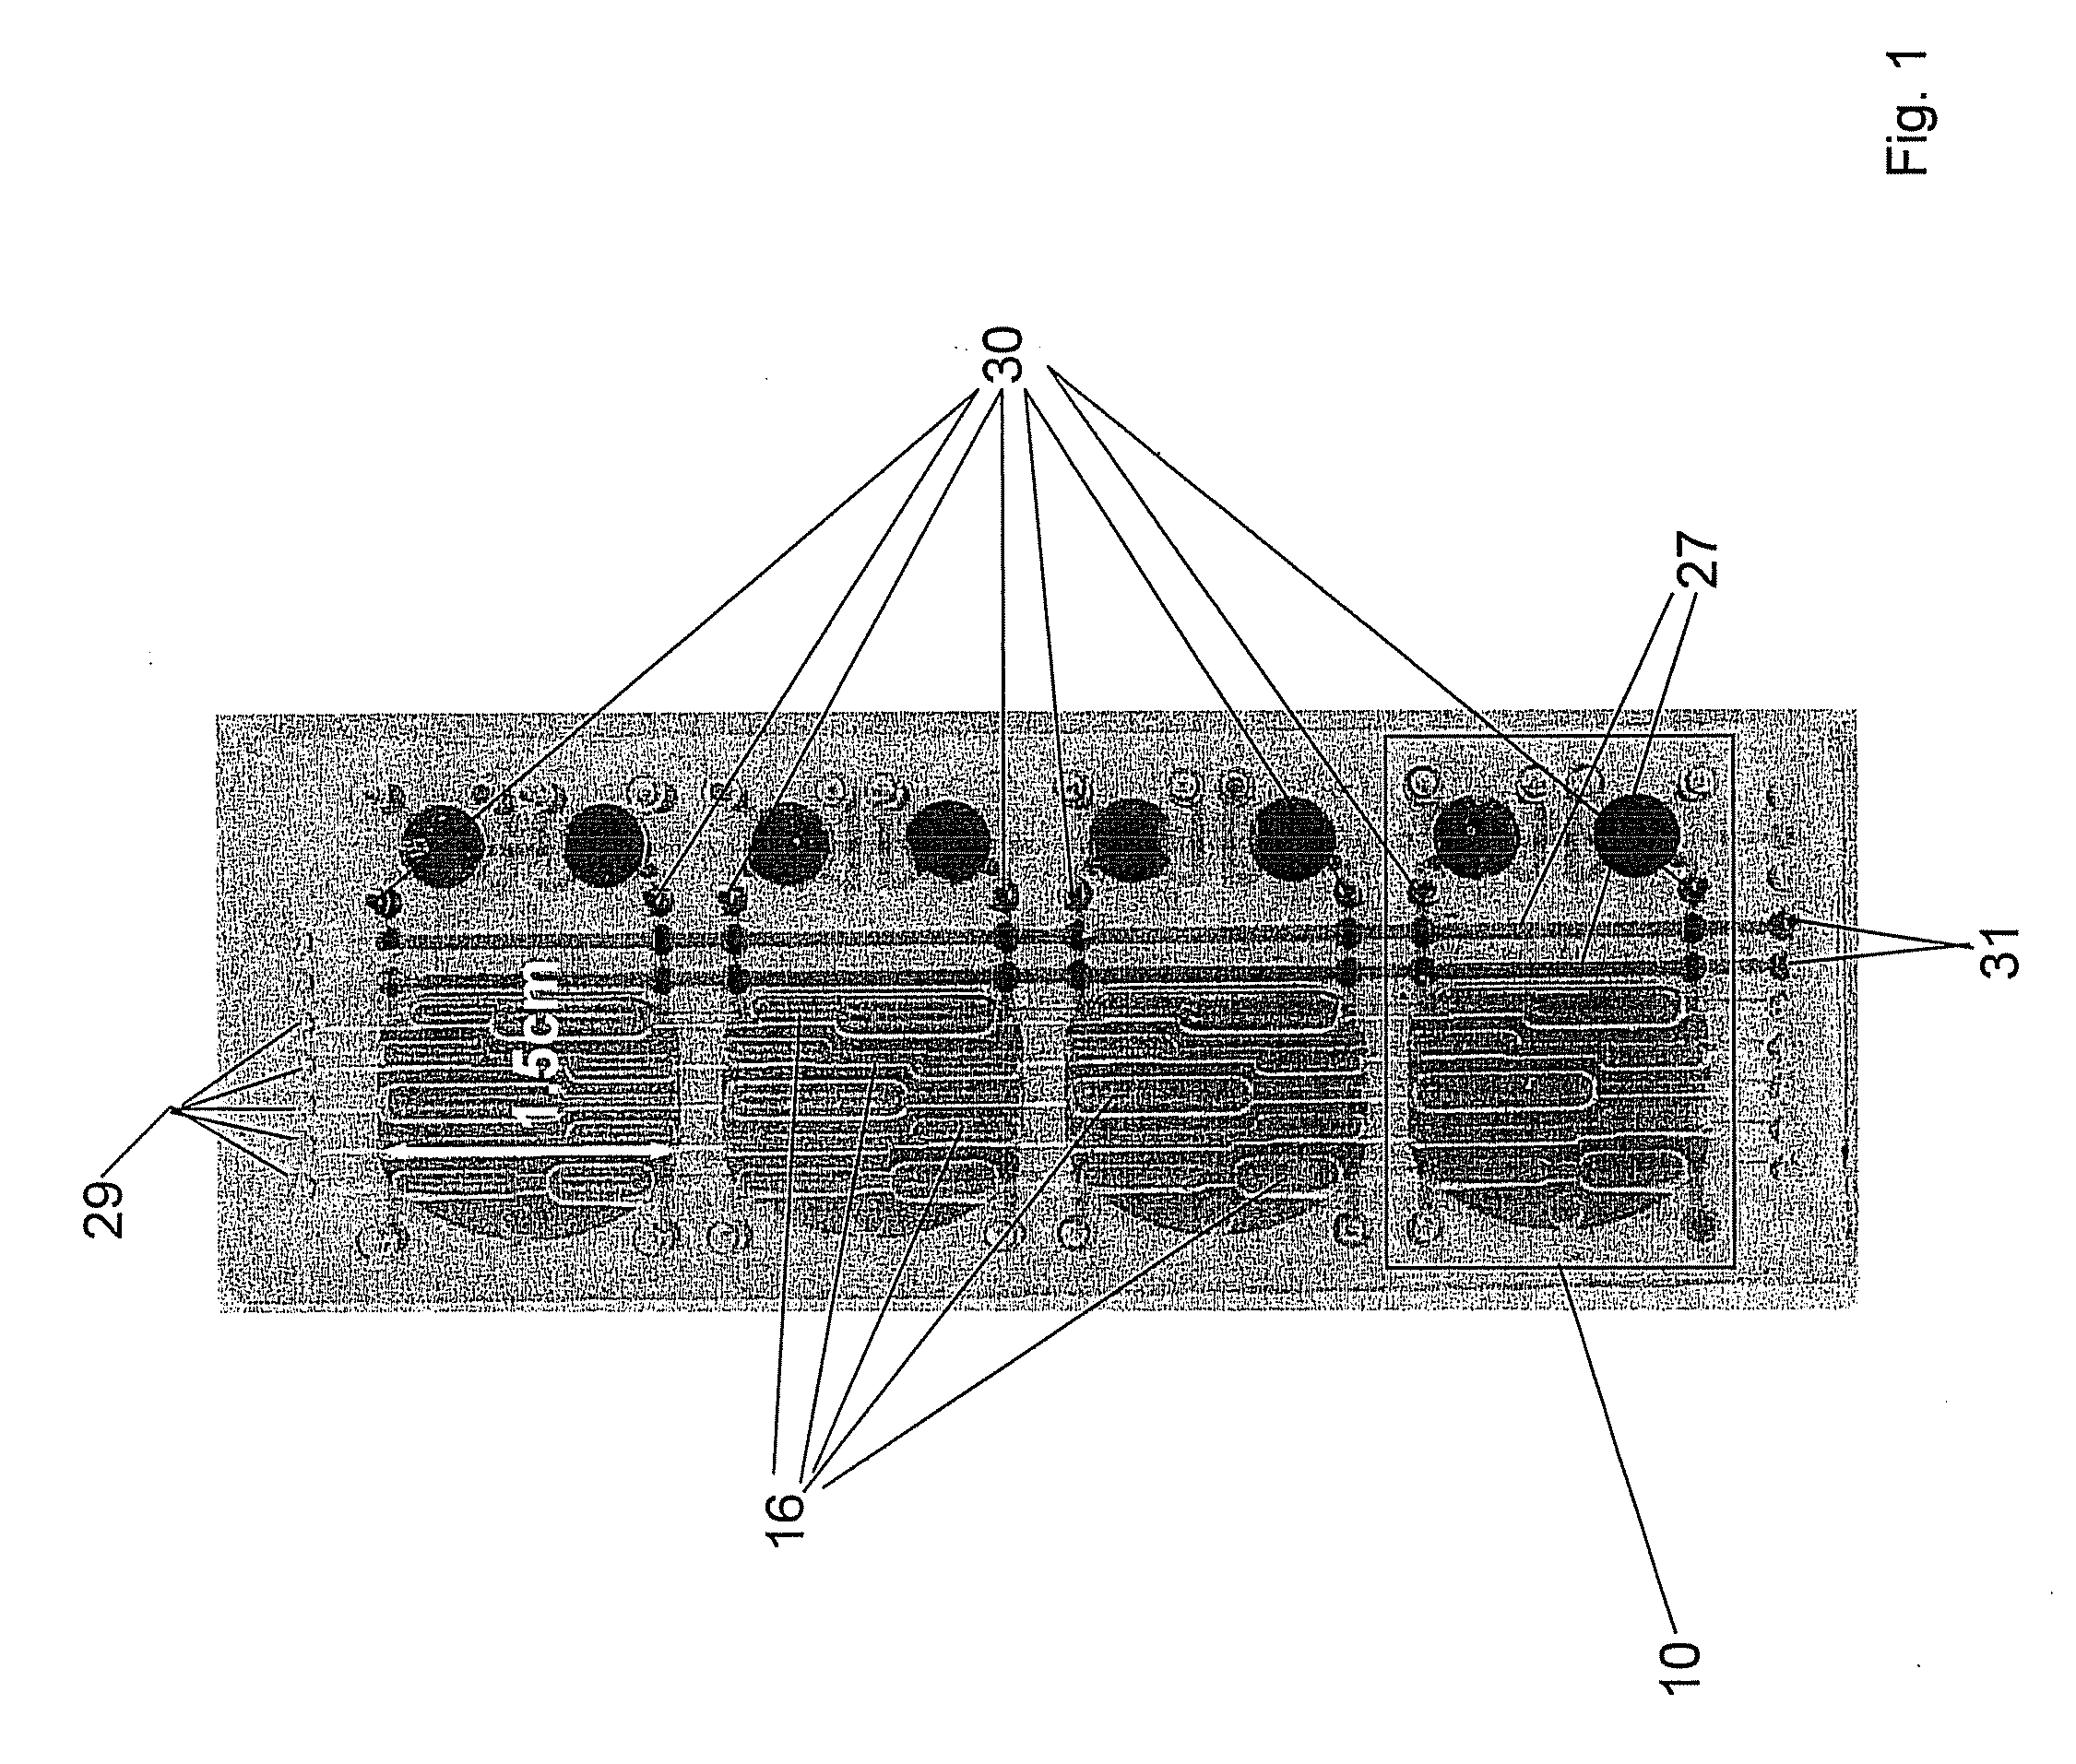 Parallel integrated bioreactor device and method